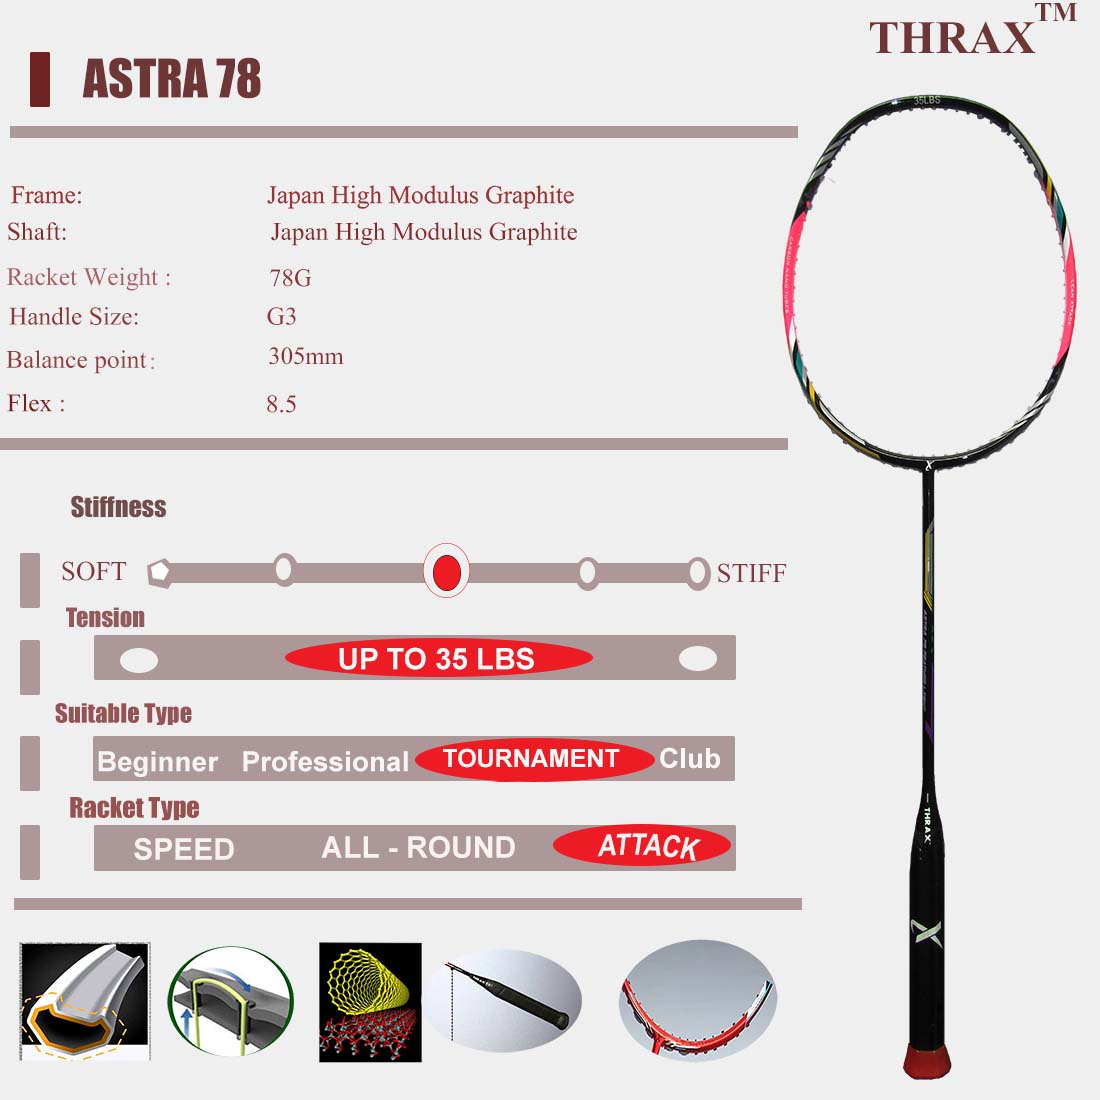 Thrax_Astra_78_Badminton_Racket_Specification_A